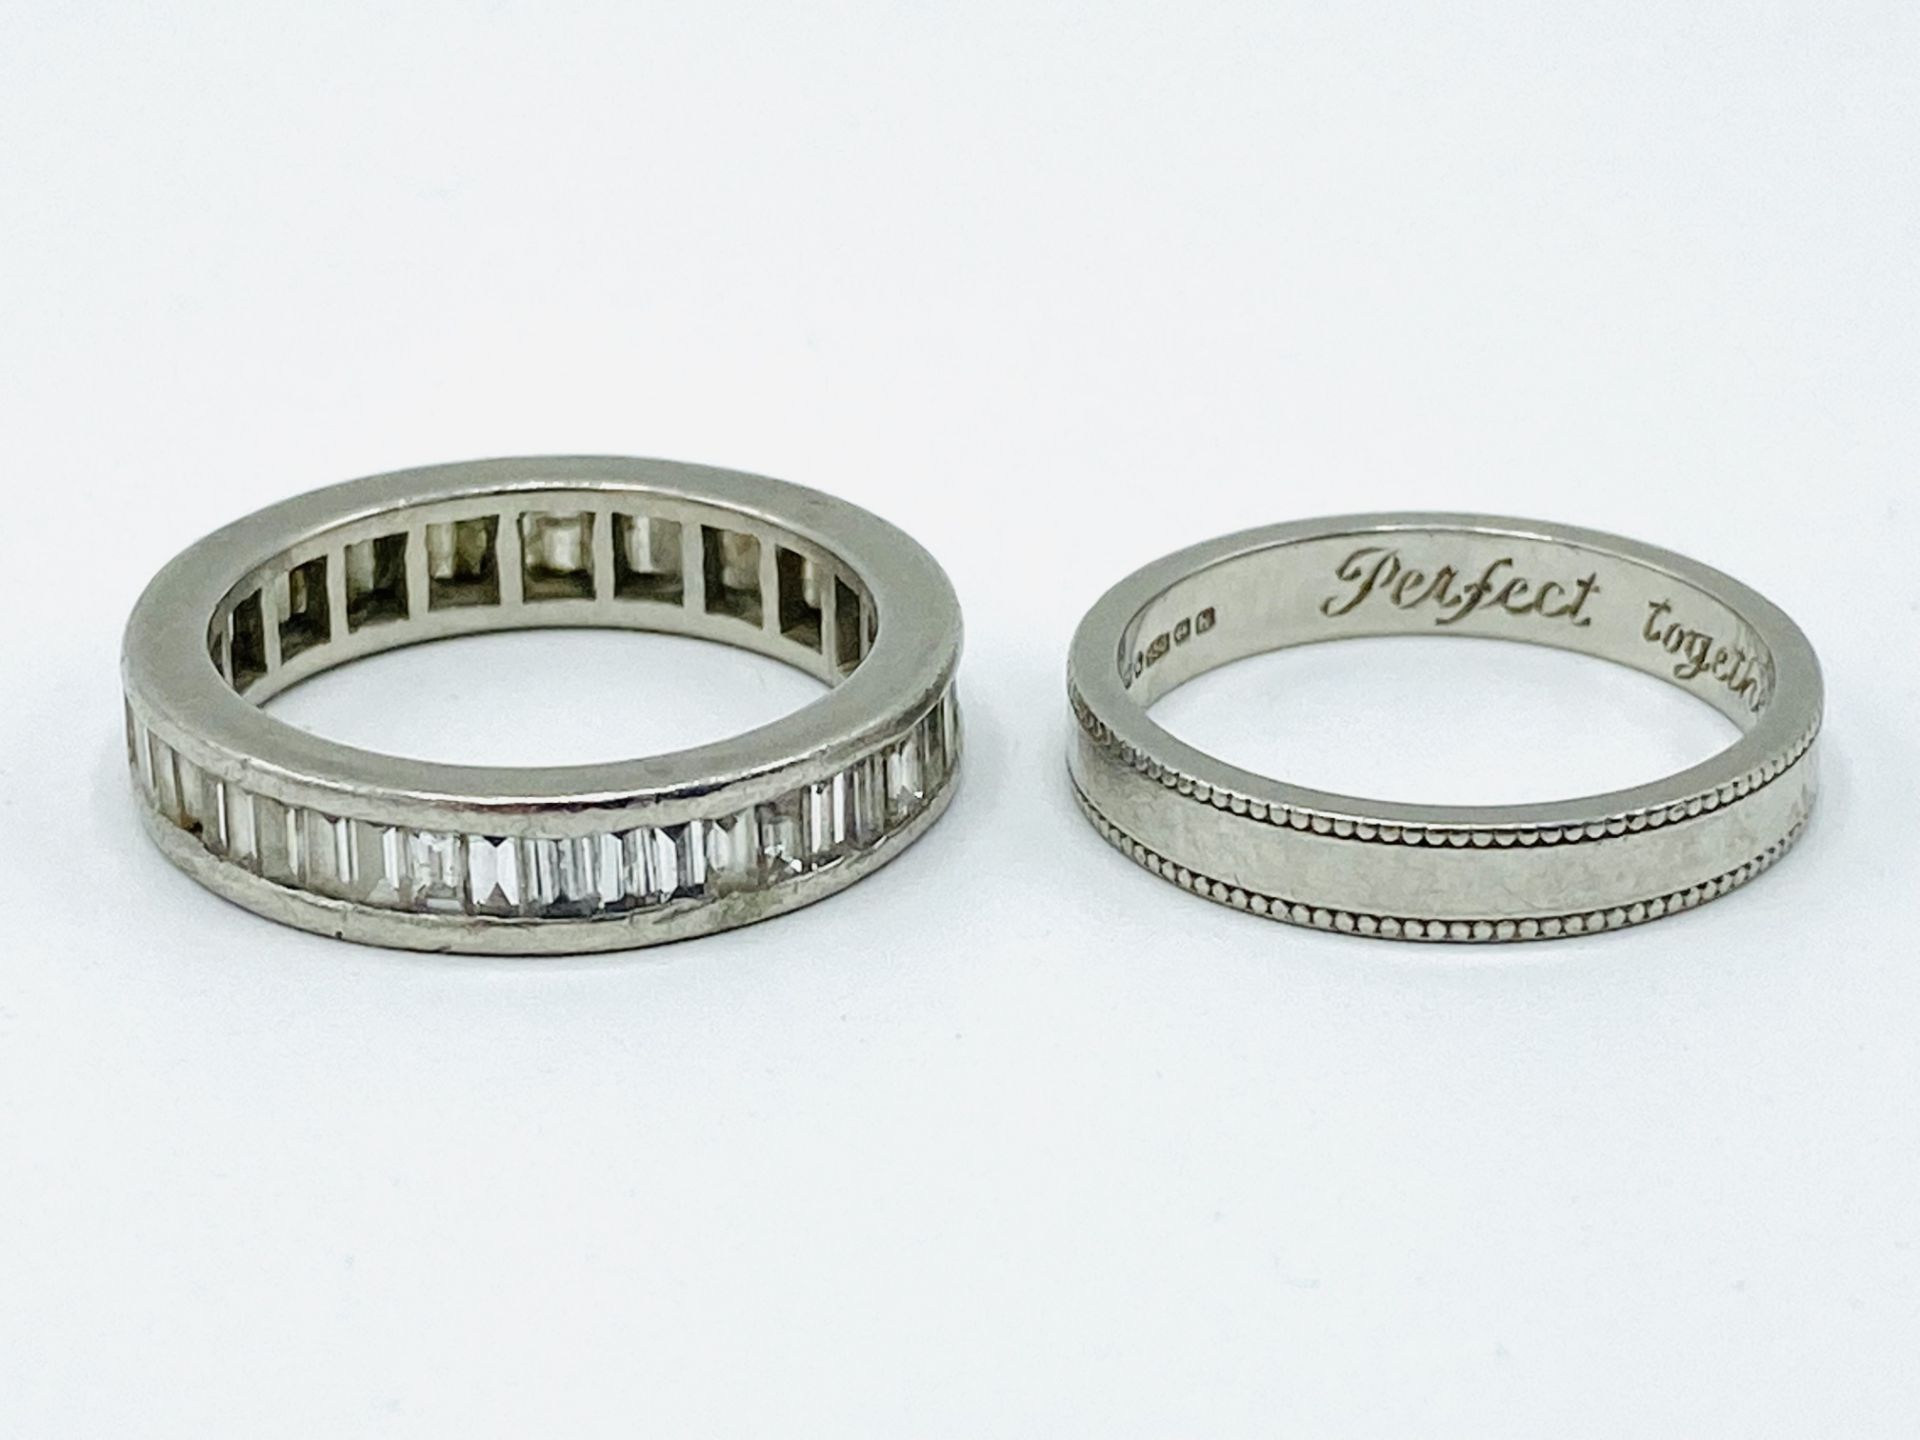 Platinum and diamond eternity ring together with a platinum band